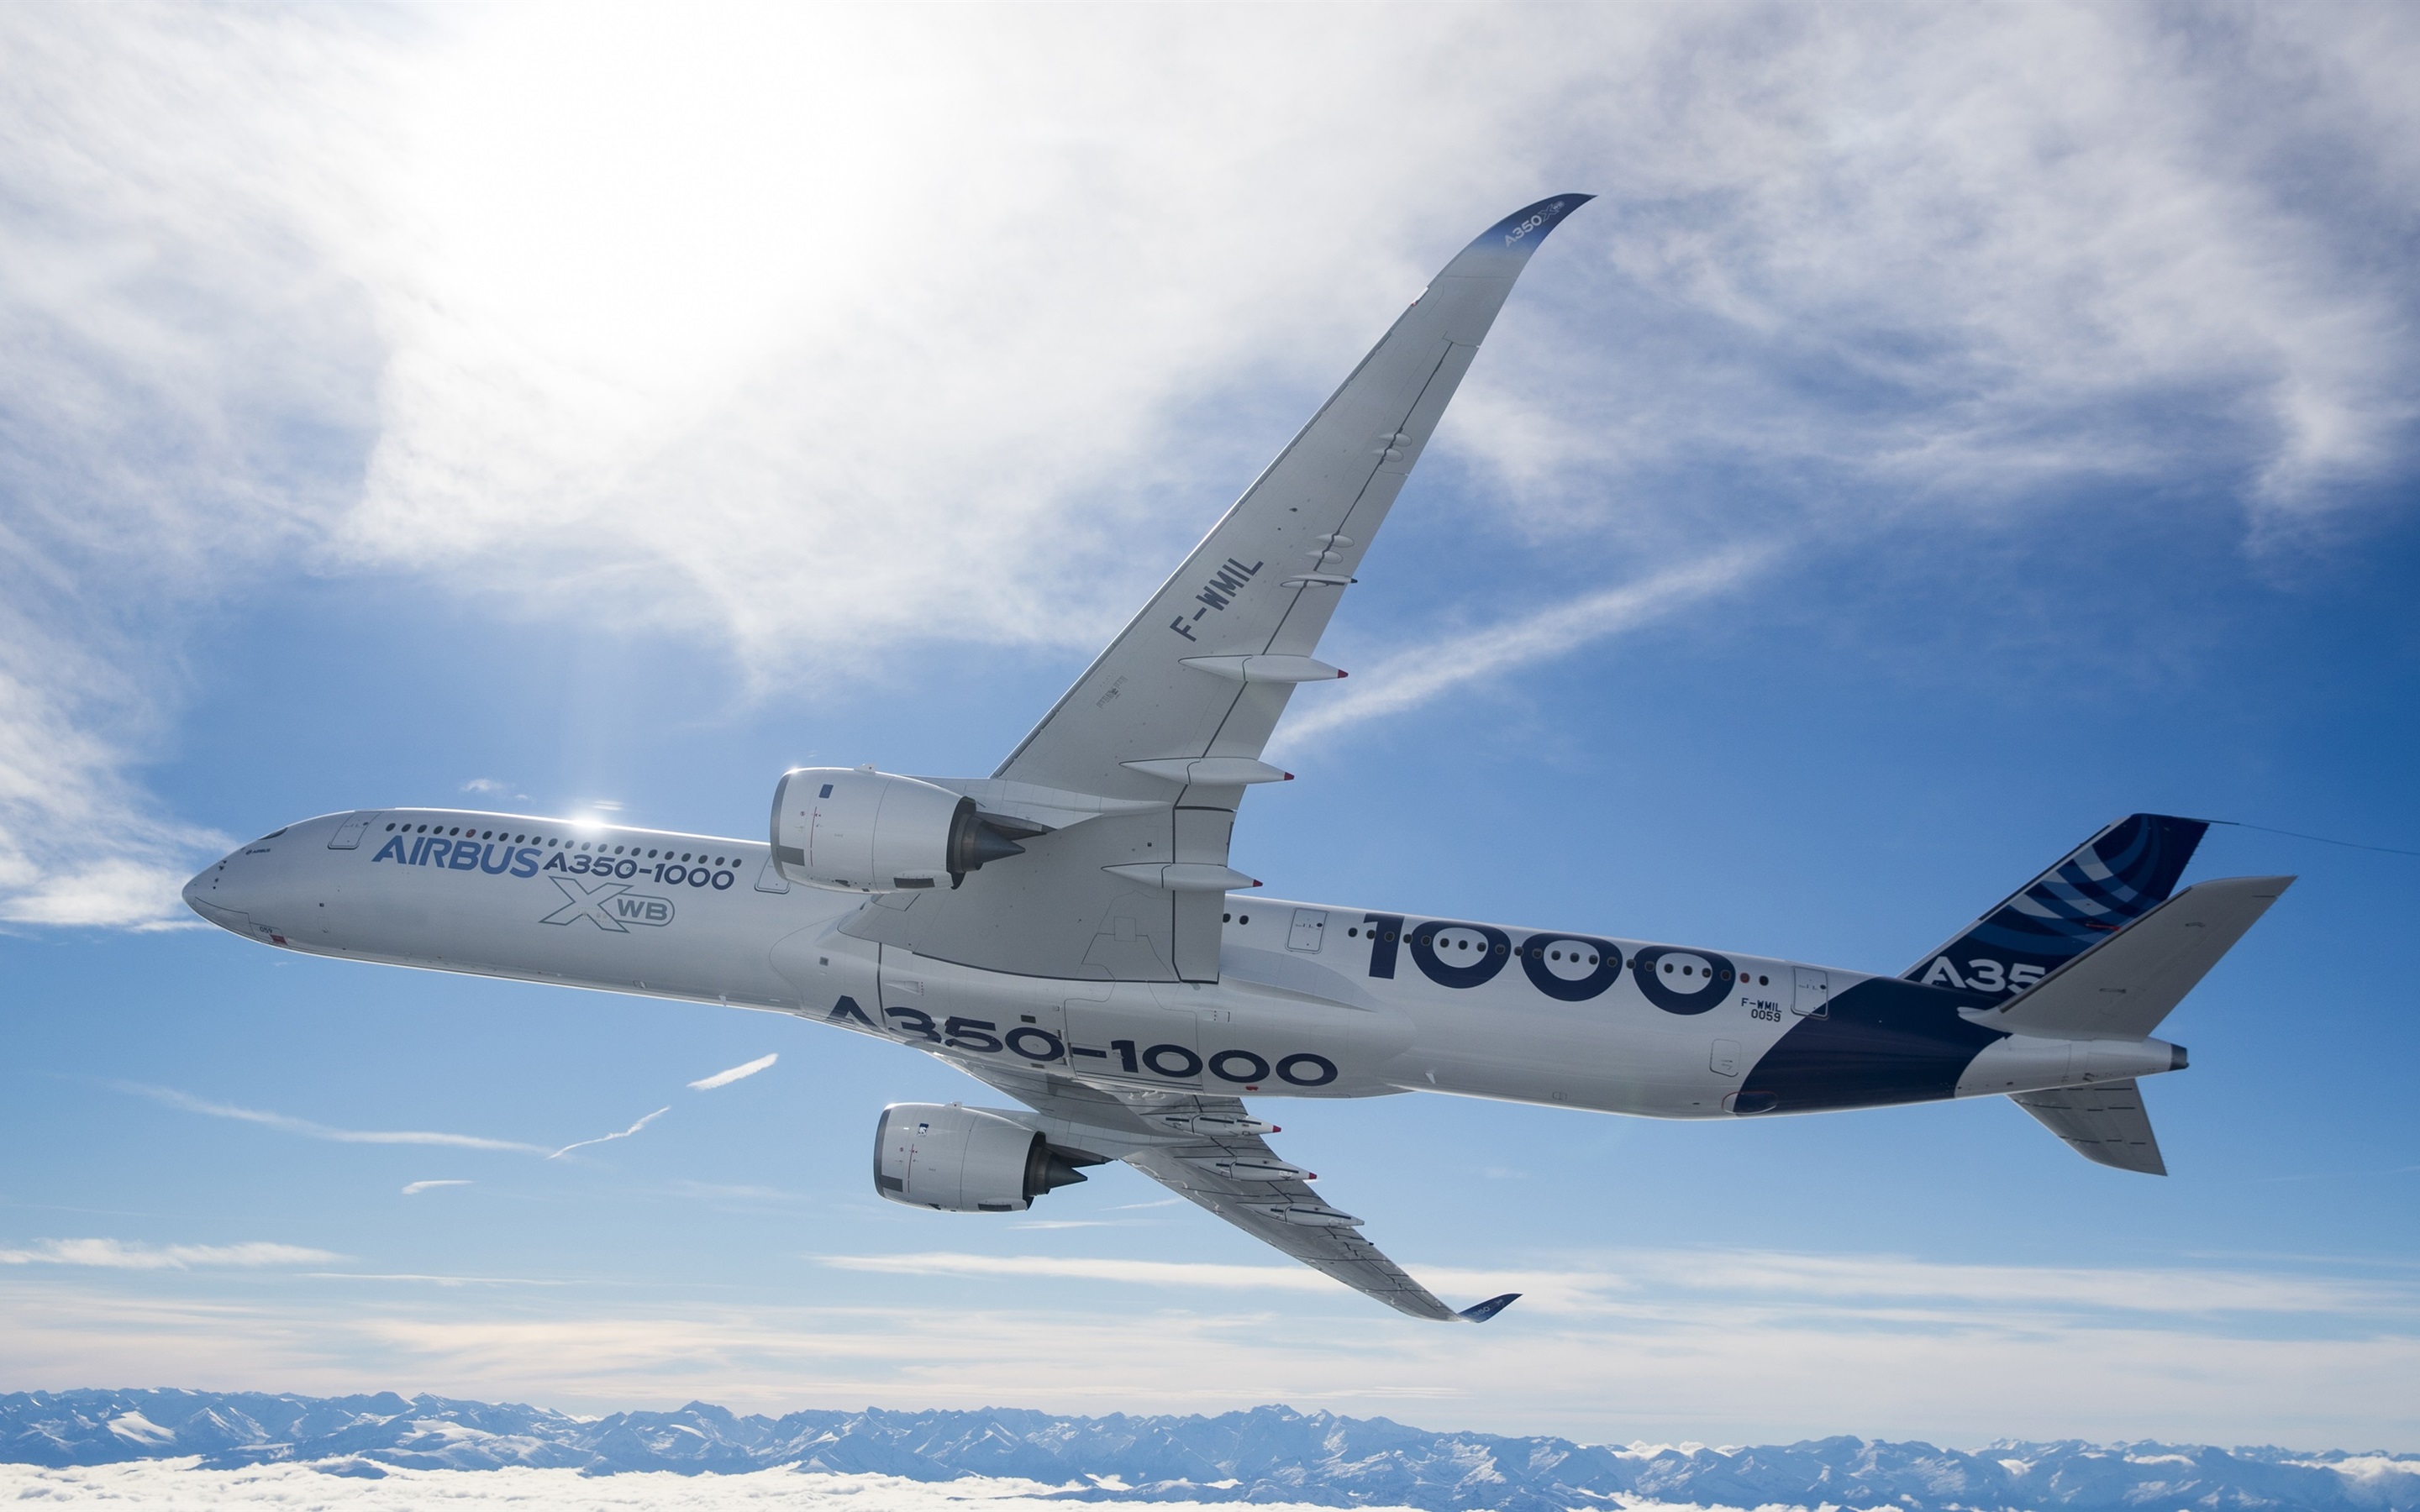 Wallpaper Airbus A350 1000 Plane 2880x1800 HD Picture, Image